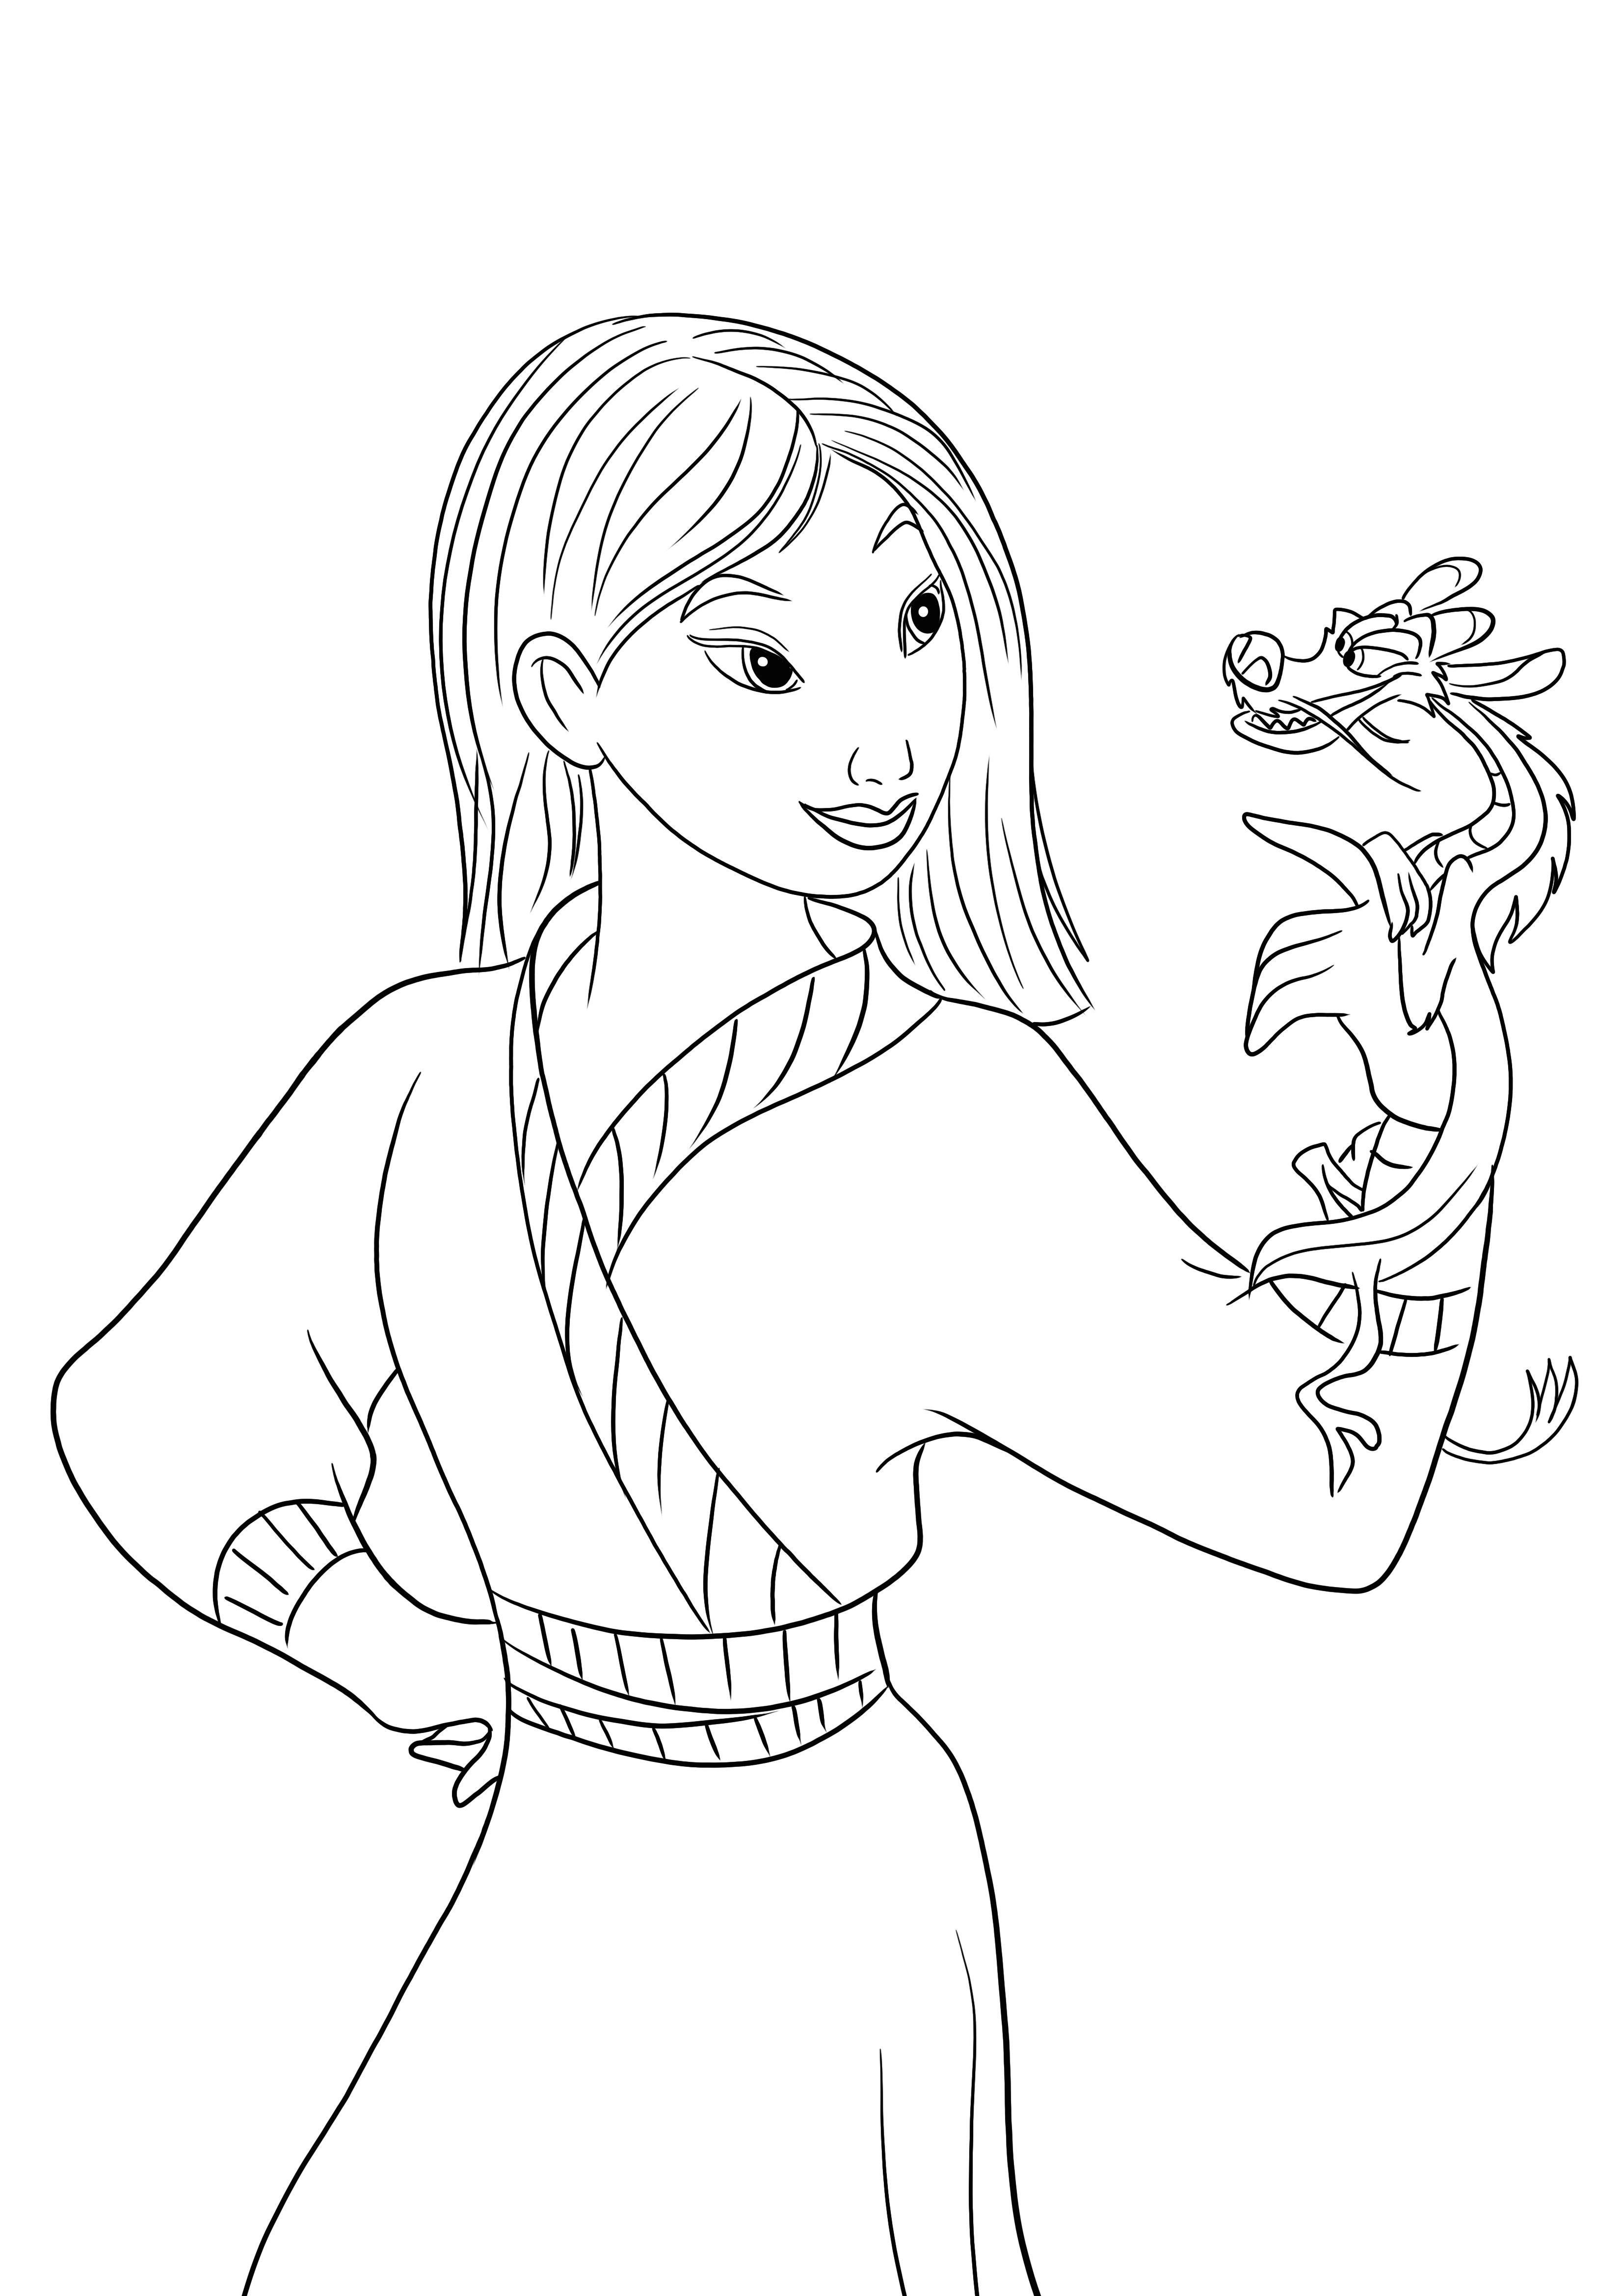 Here is a free coloring image of Mulan and Mushu to print or download